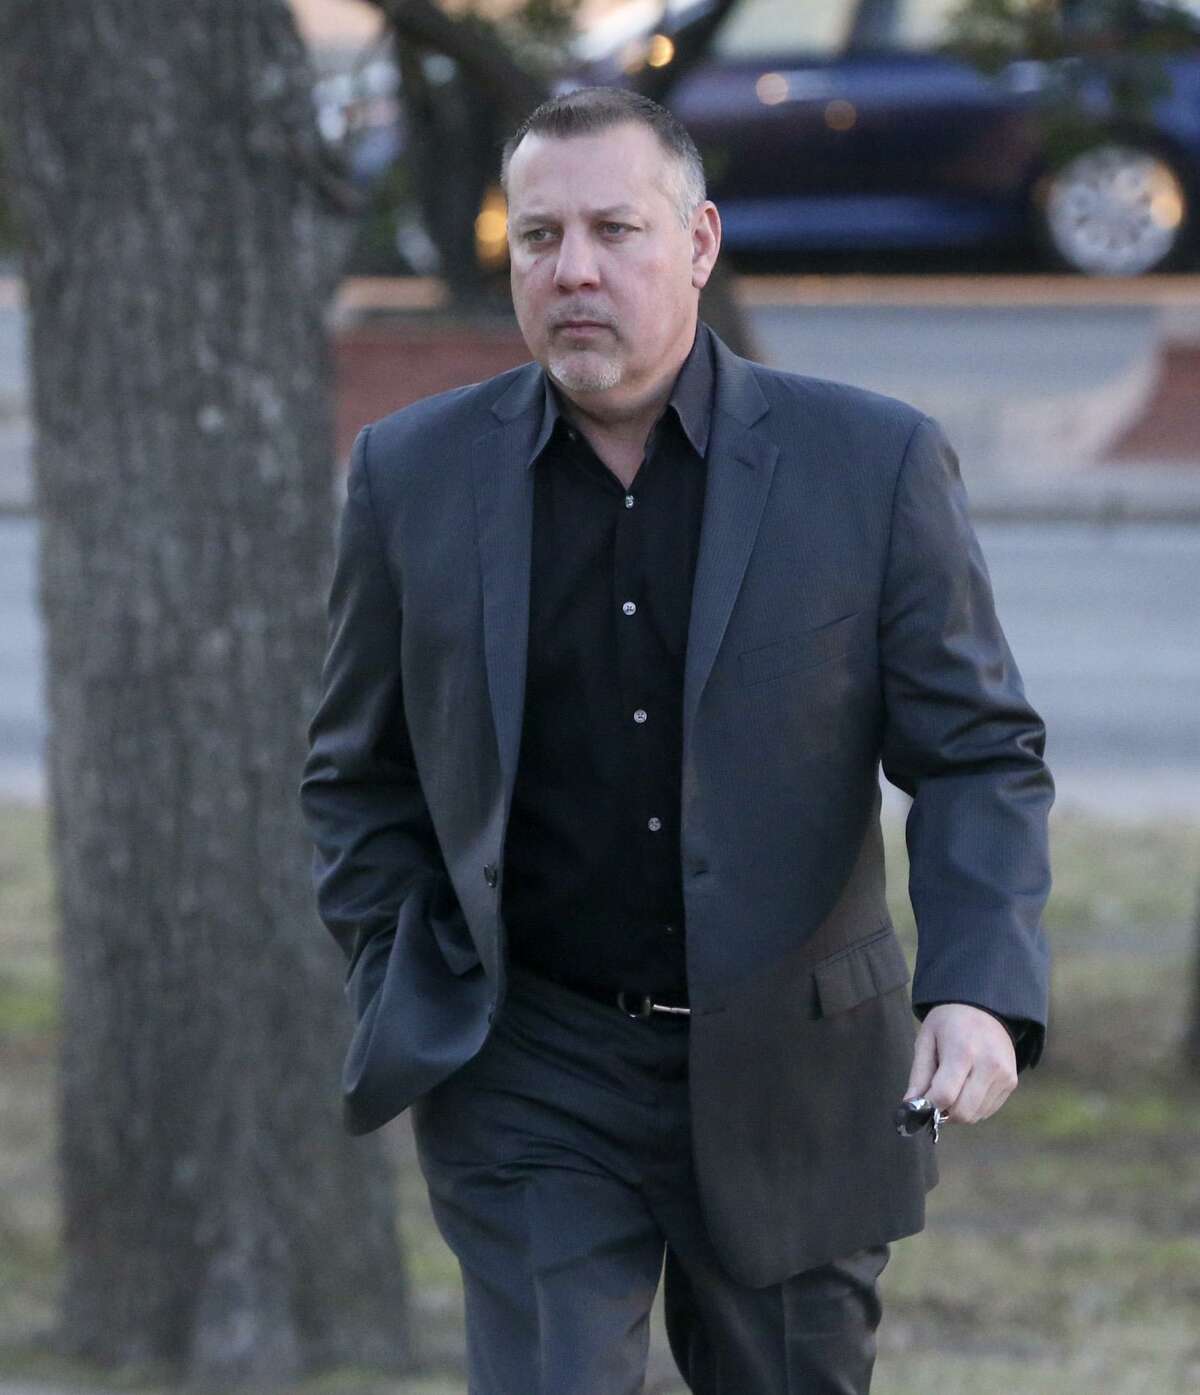 Former FourWinds Logistics CEO Stan Bates pleaded guilty to eight felony charges on Jan. 8 rather than stand trial with state Sen. Carlos Uresti and Gary Cain.